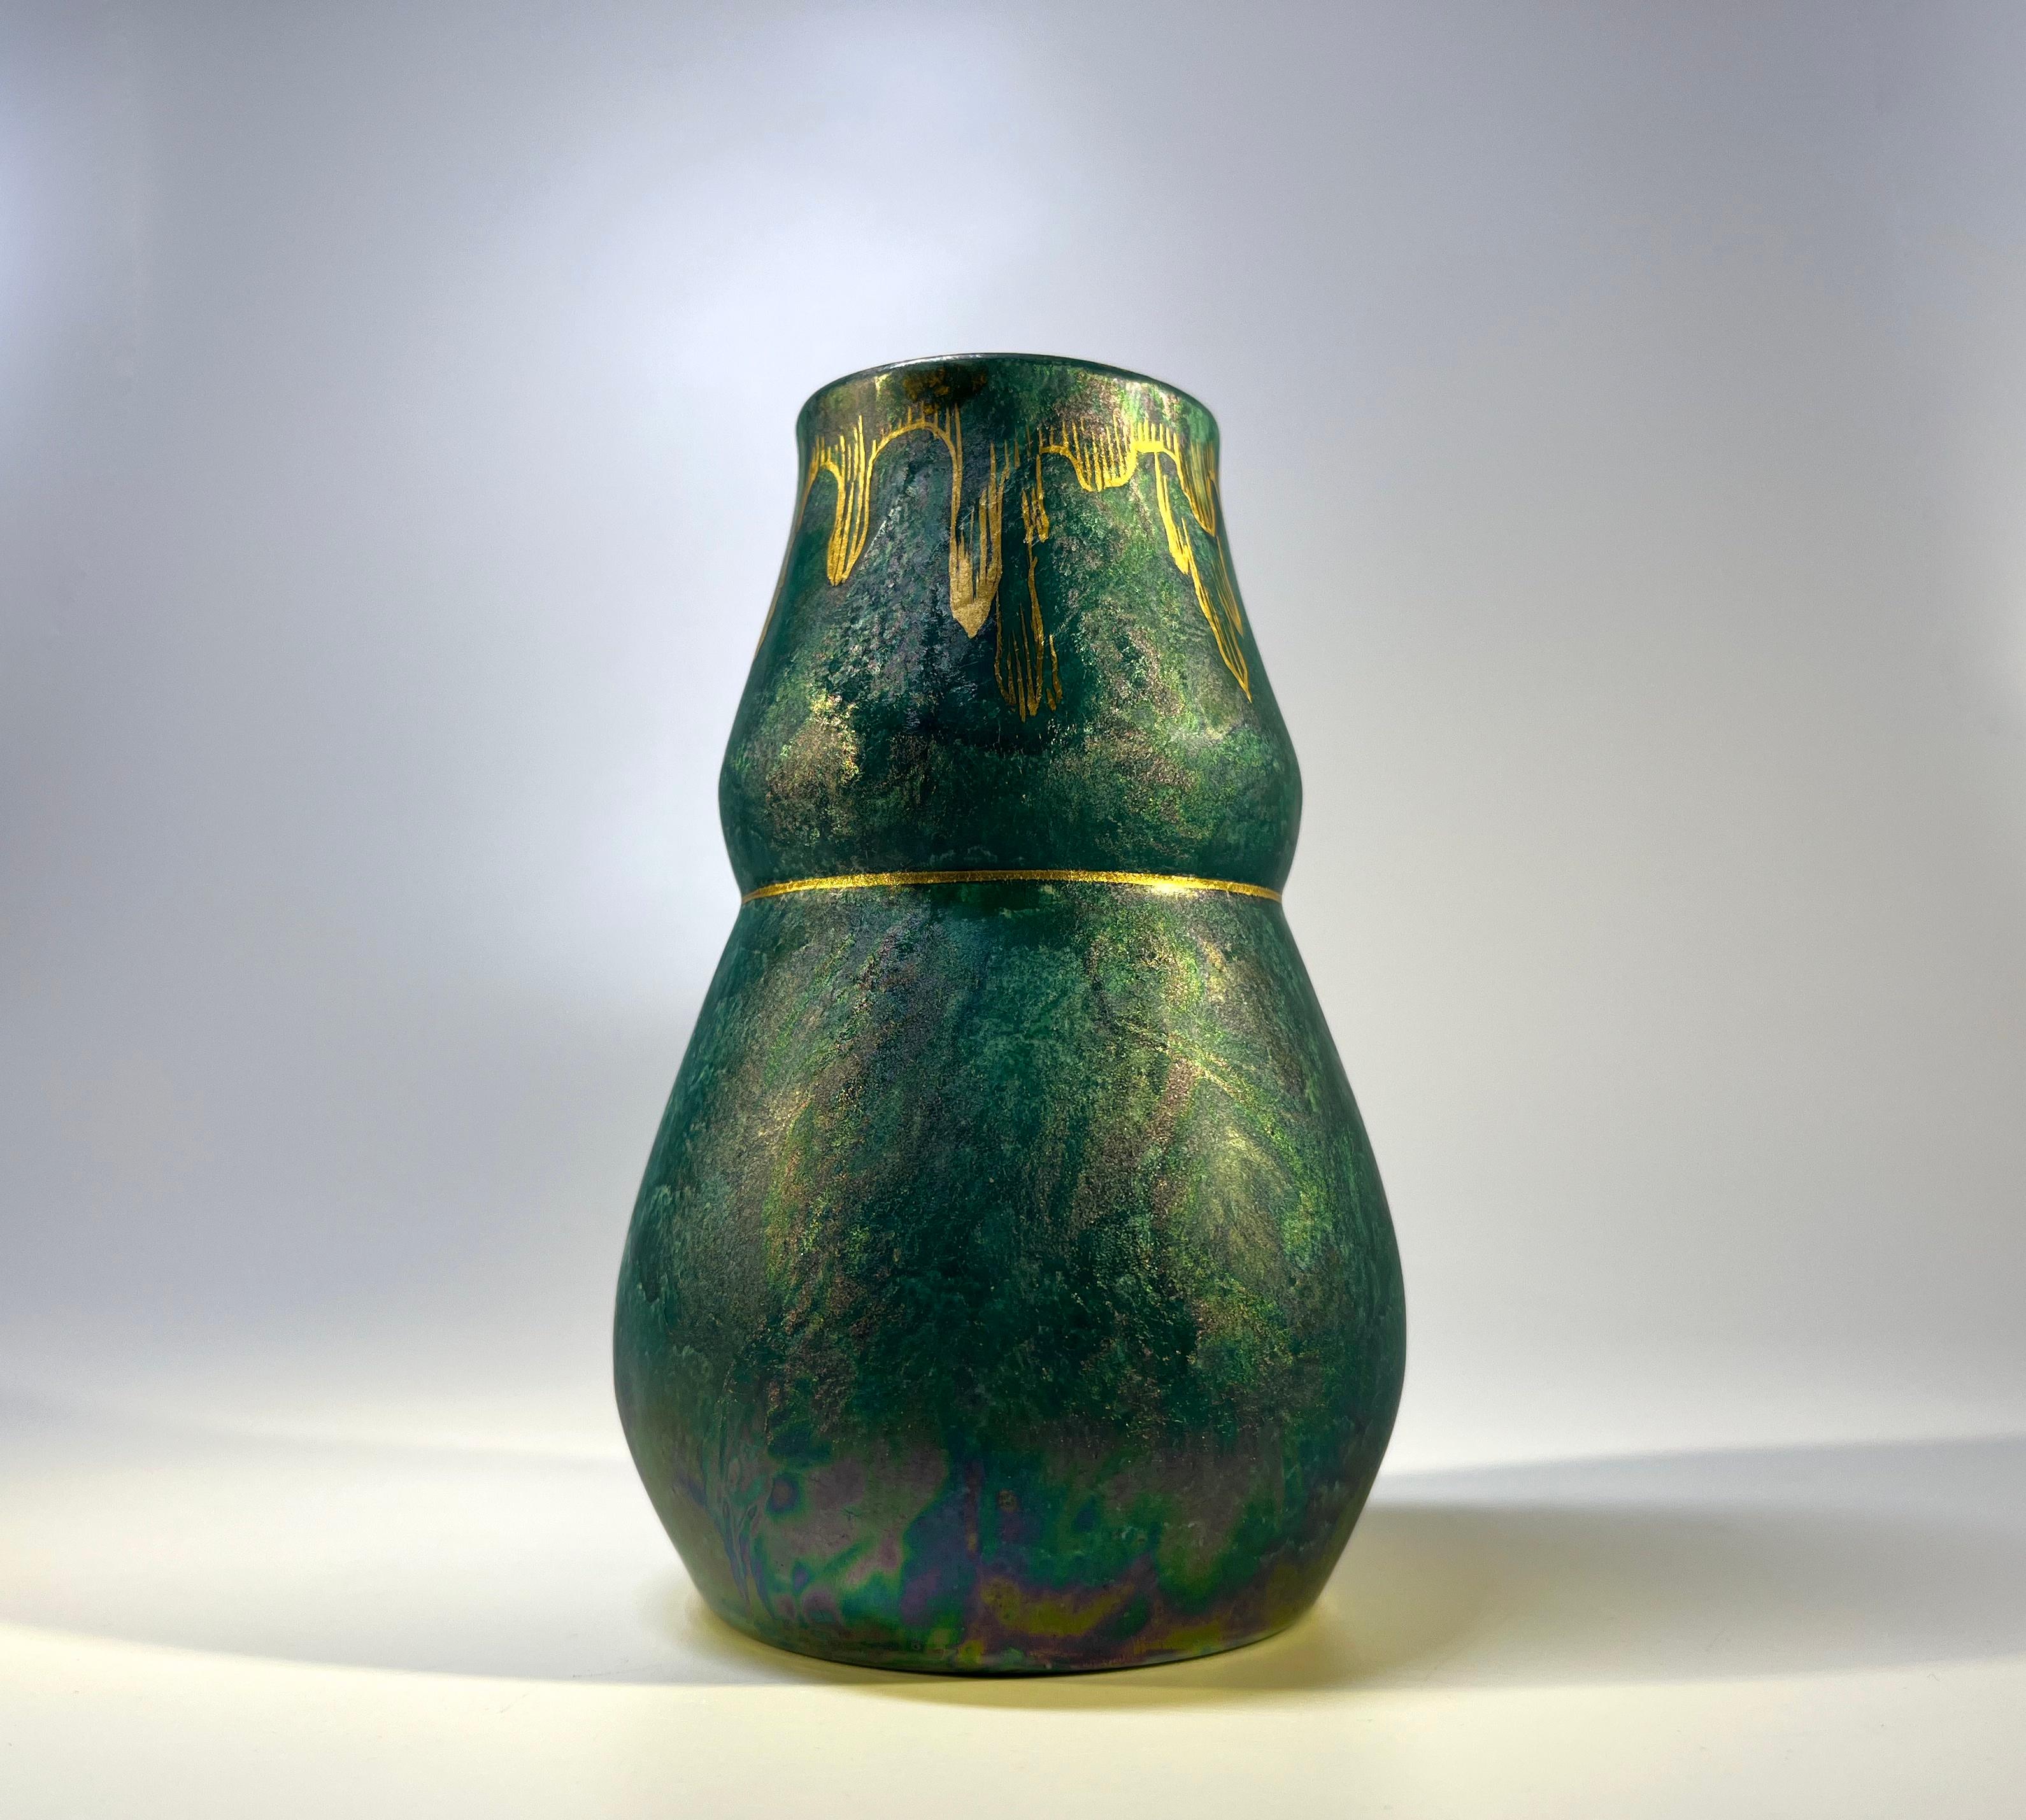 A super little vase glazed with an intriguing sea green lustre and hand decorated with gilt decoration by Josef Ekberg for Gustavsberg, Sweden
Wonderful Ekberg craftsmanship
Signed and Anchor mark to base
Height 4.75 inch, Diameter 3.25 inch
In